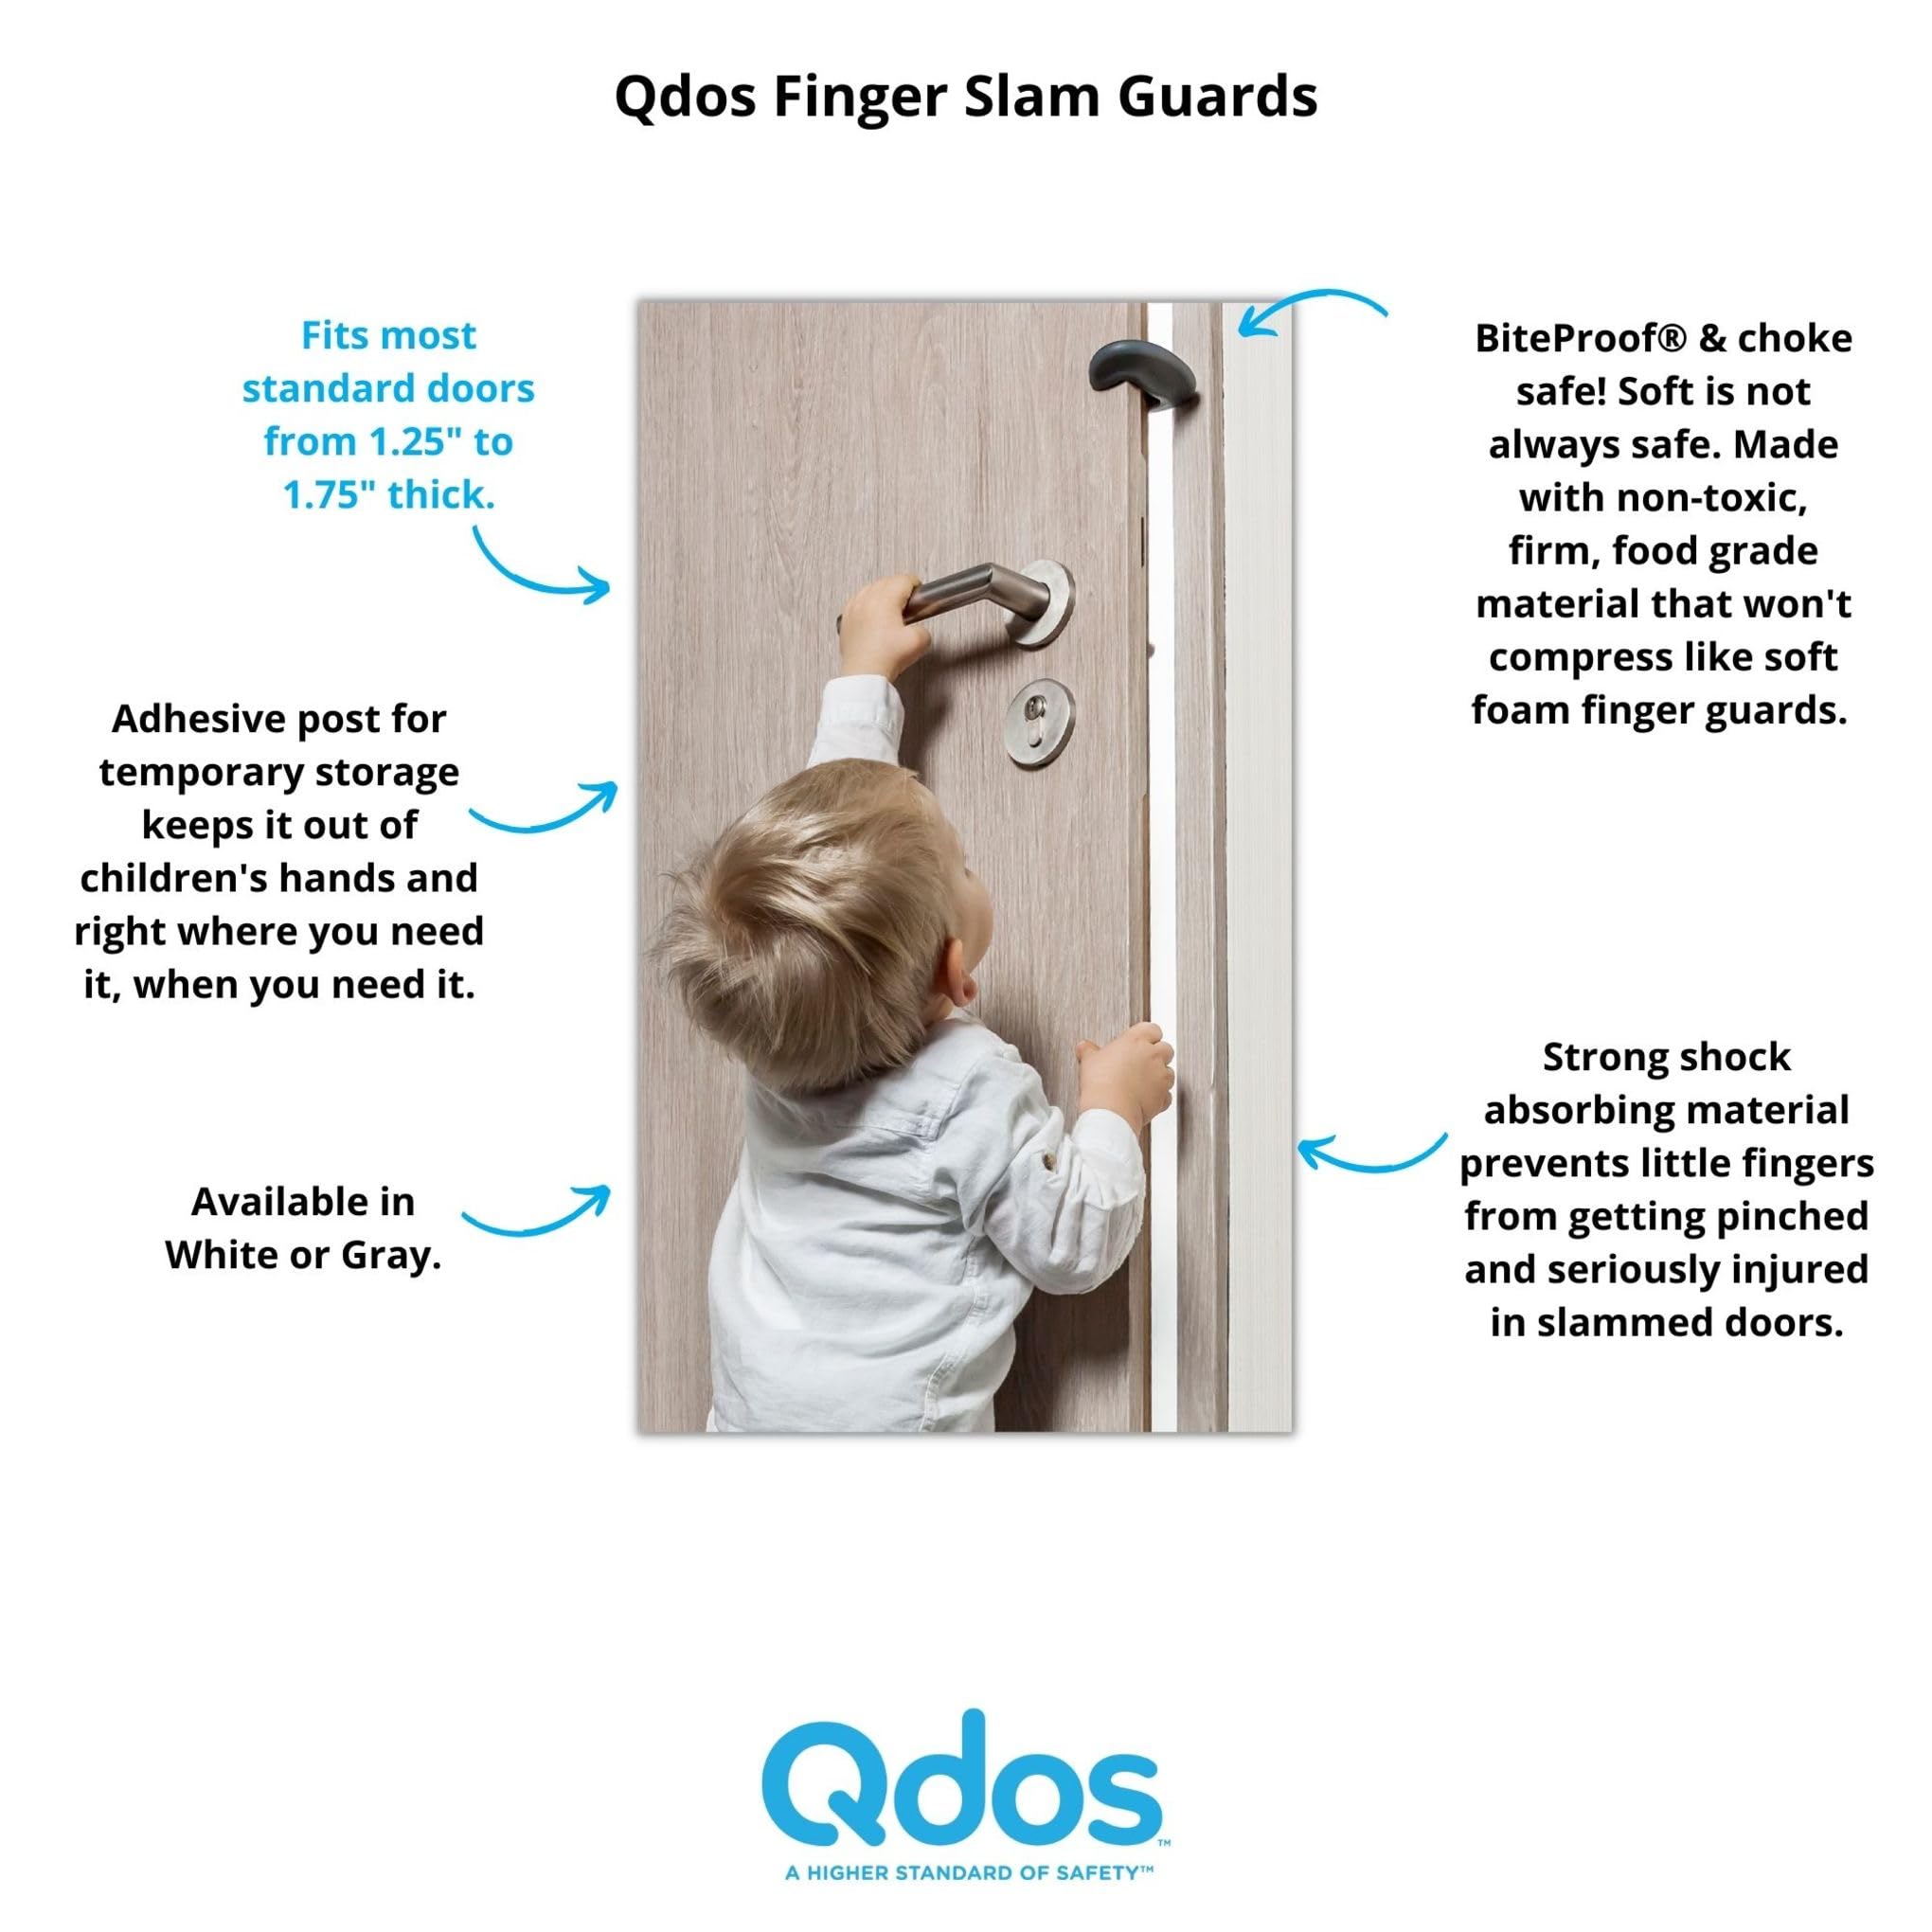 Qdos Safety Finger Slam Pinch Guard | Gray | Guaranteed NOT to compress or fall off like other products - Protect Fingers from Slamming Doors - Bite Proof & Choke Safe - Food Grade Material | 2 pack